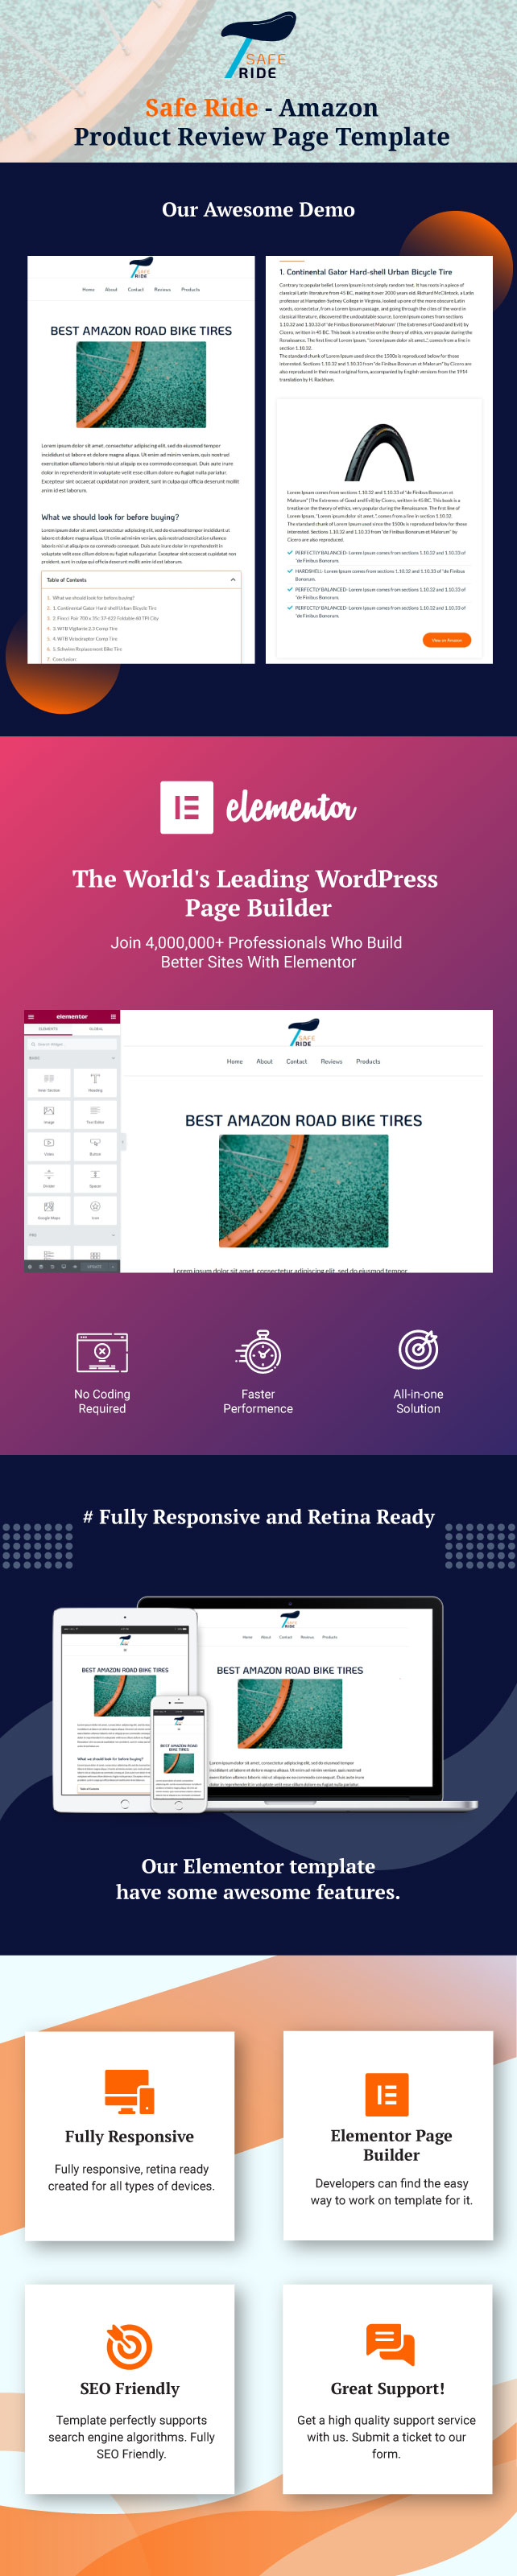 safe-ride-amazon-product-review-page-template